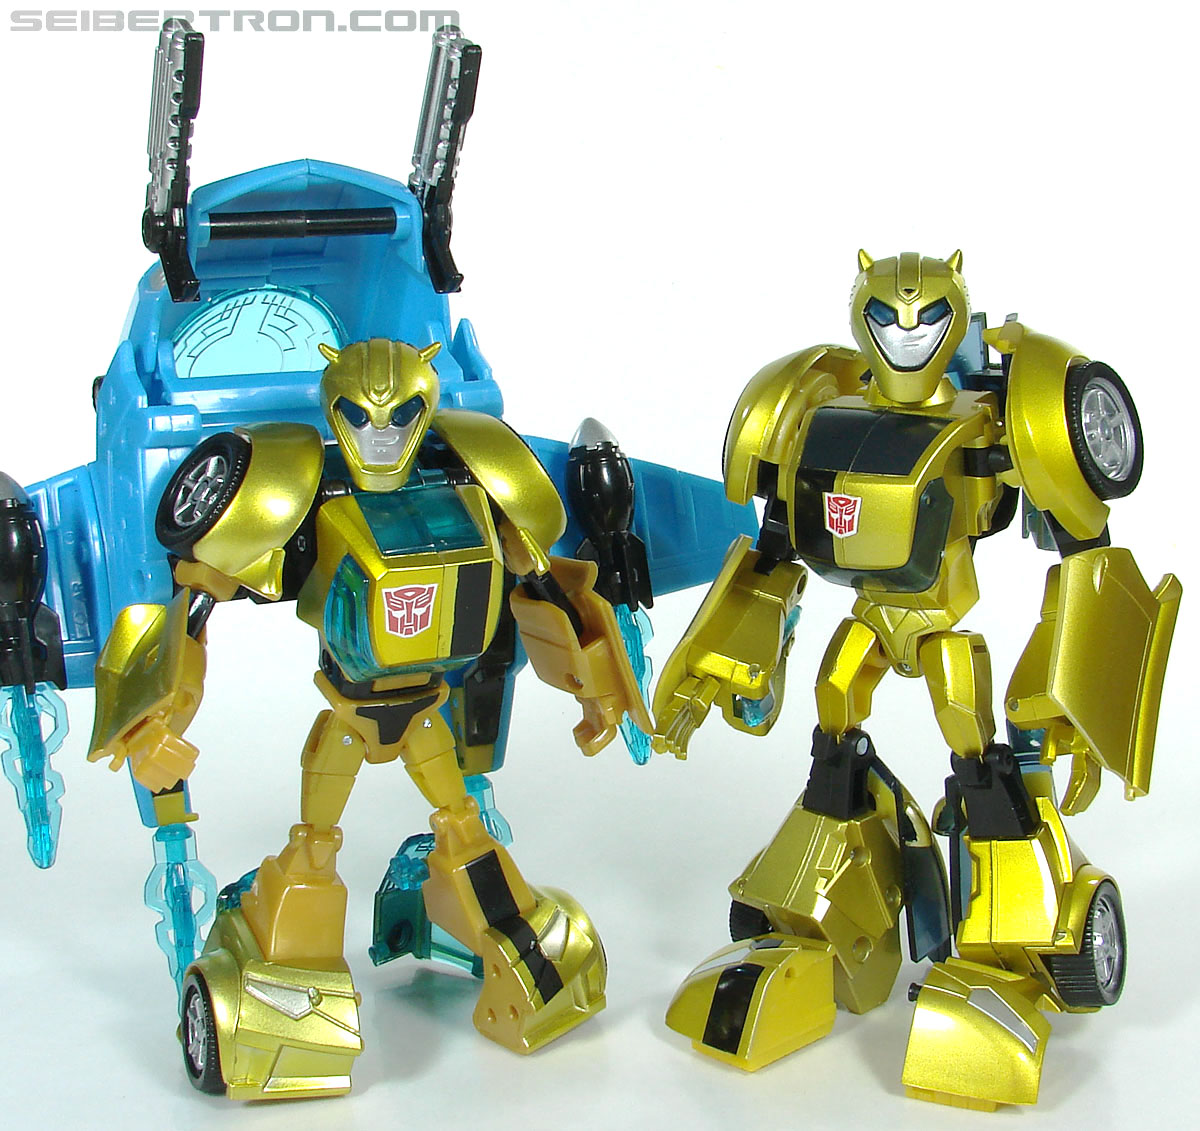 Transformers Animated Bumblebee (Image #115 of 115)